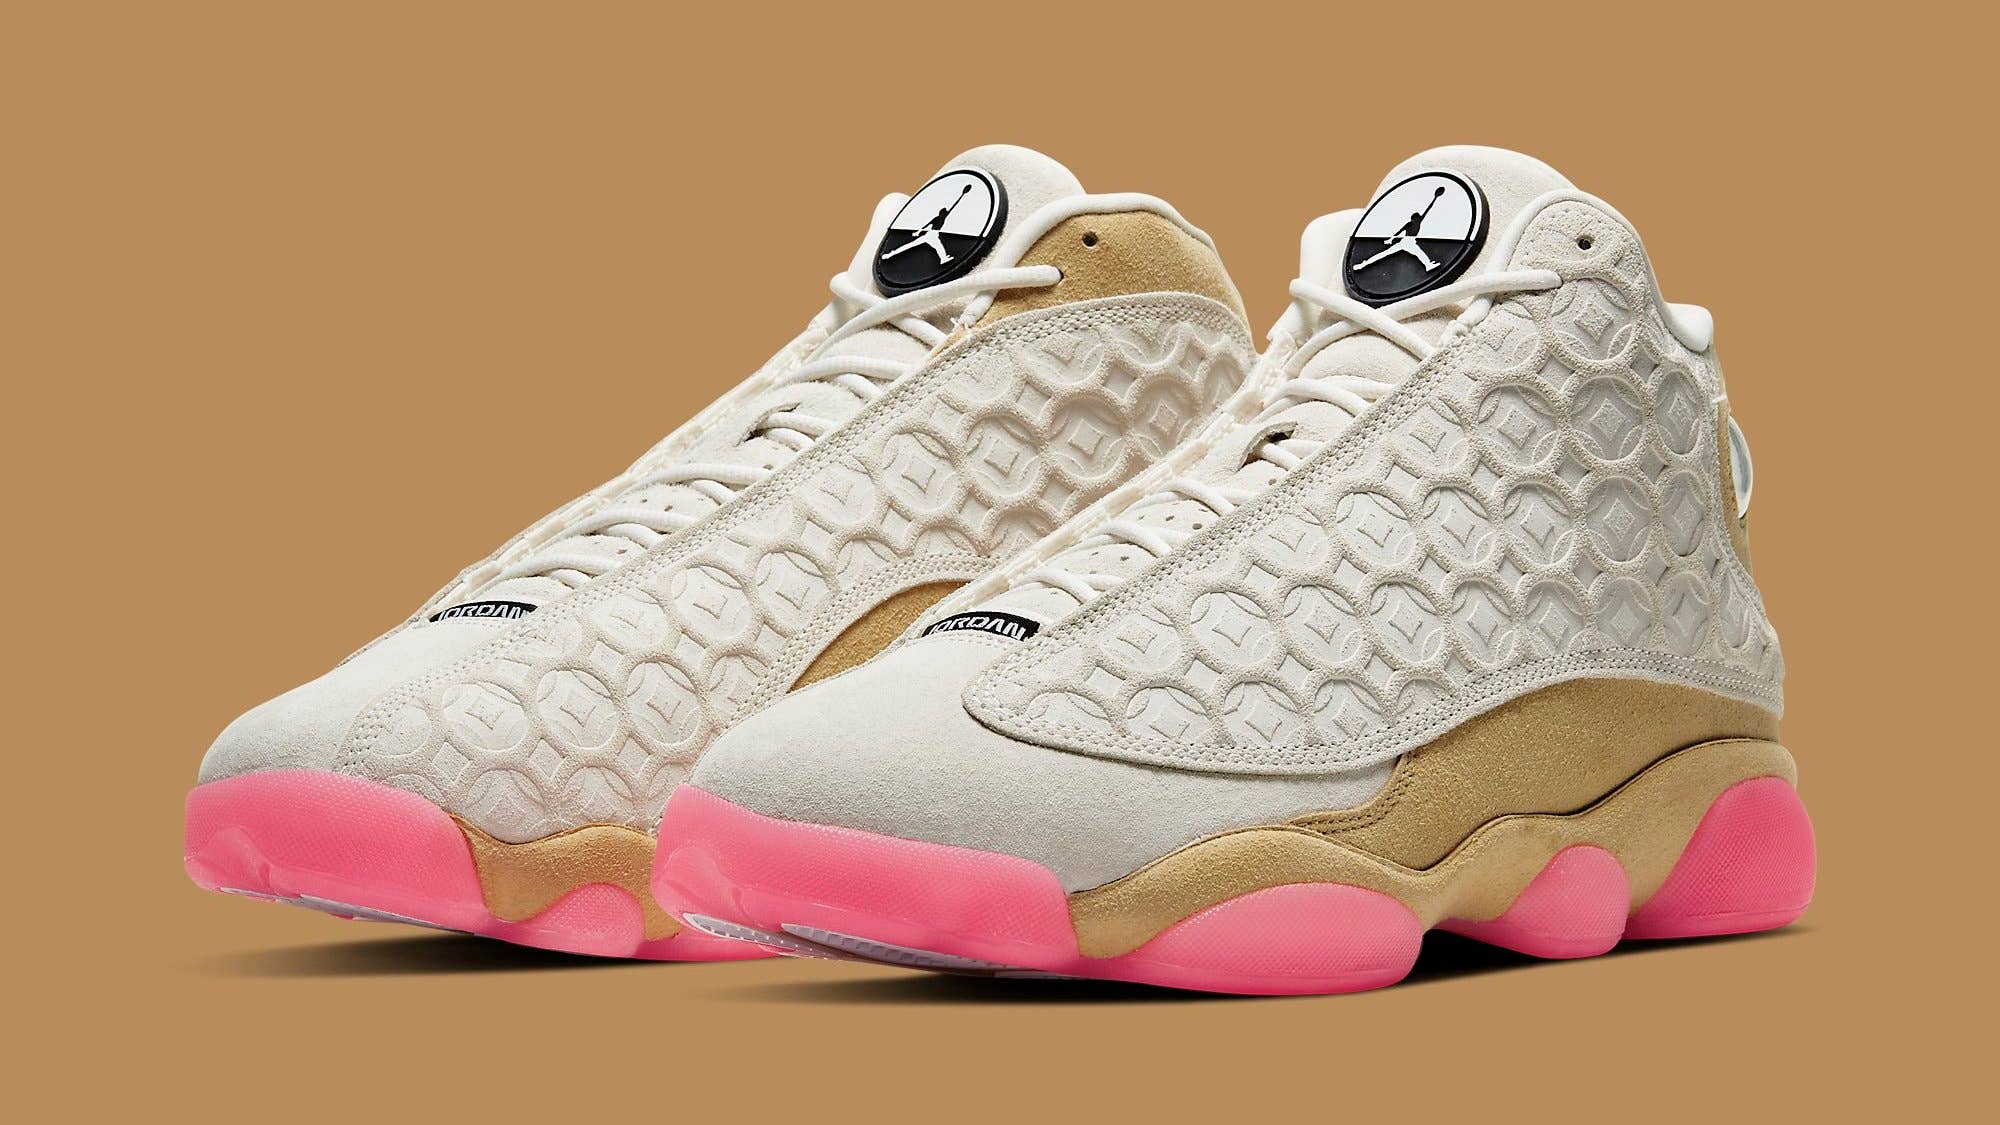 New Air Jordan 13 Is Releasing to Celebrate 2020's Chinese New Year |  Complex